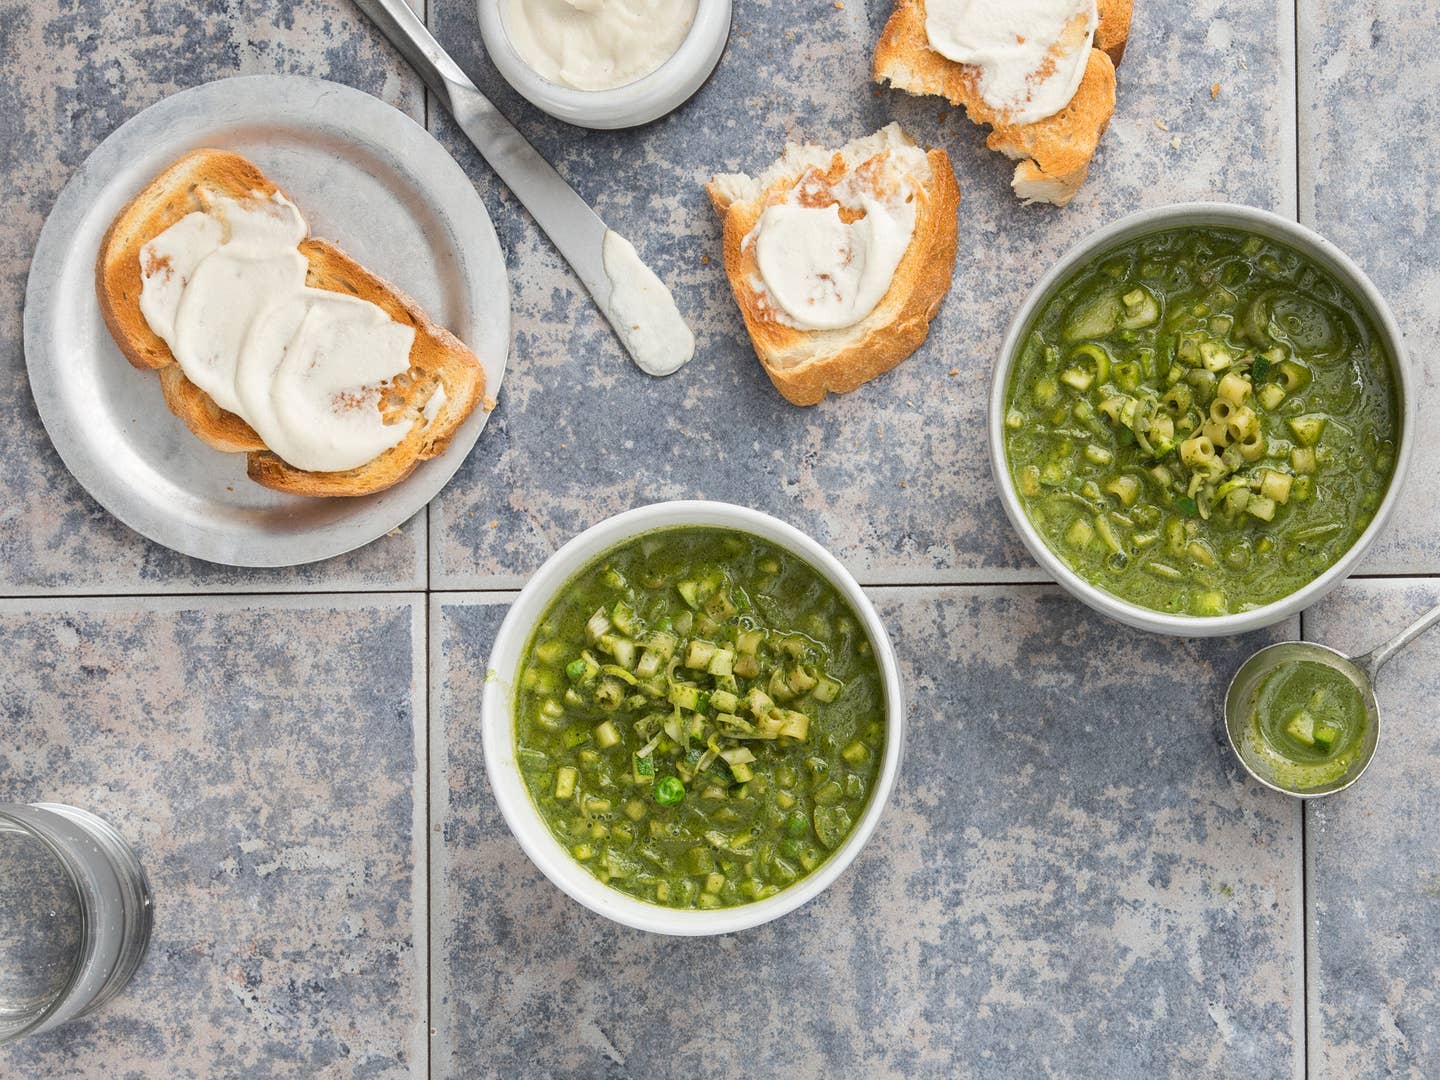 Green Minestrone with Spinach Pesto